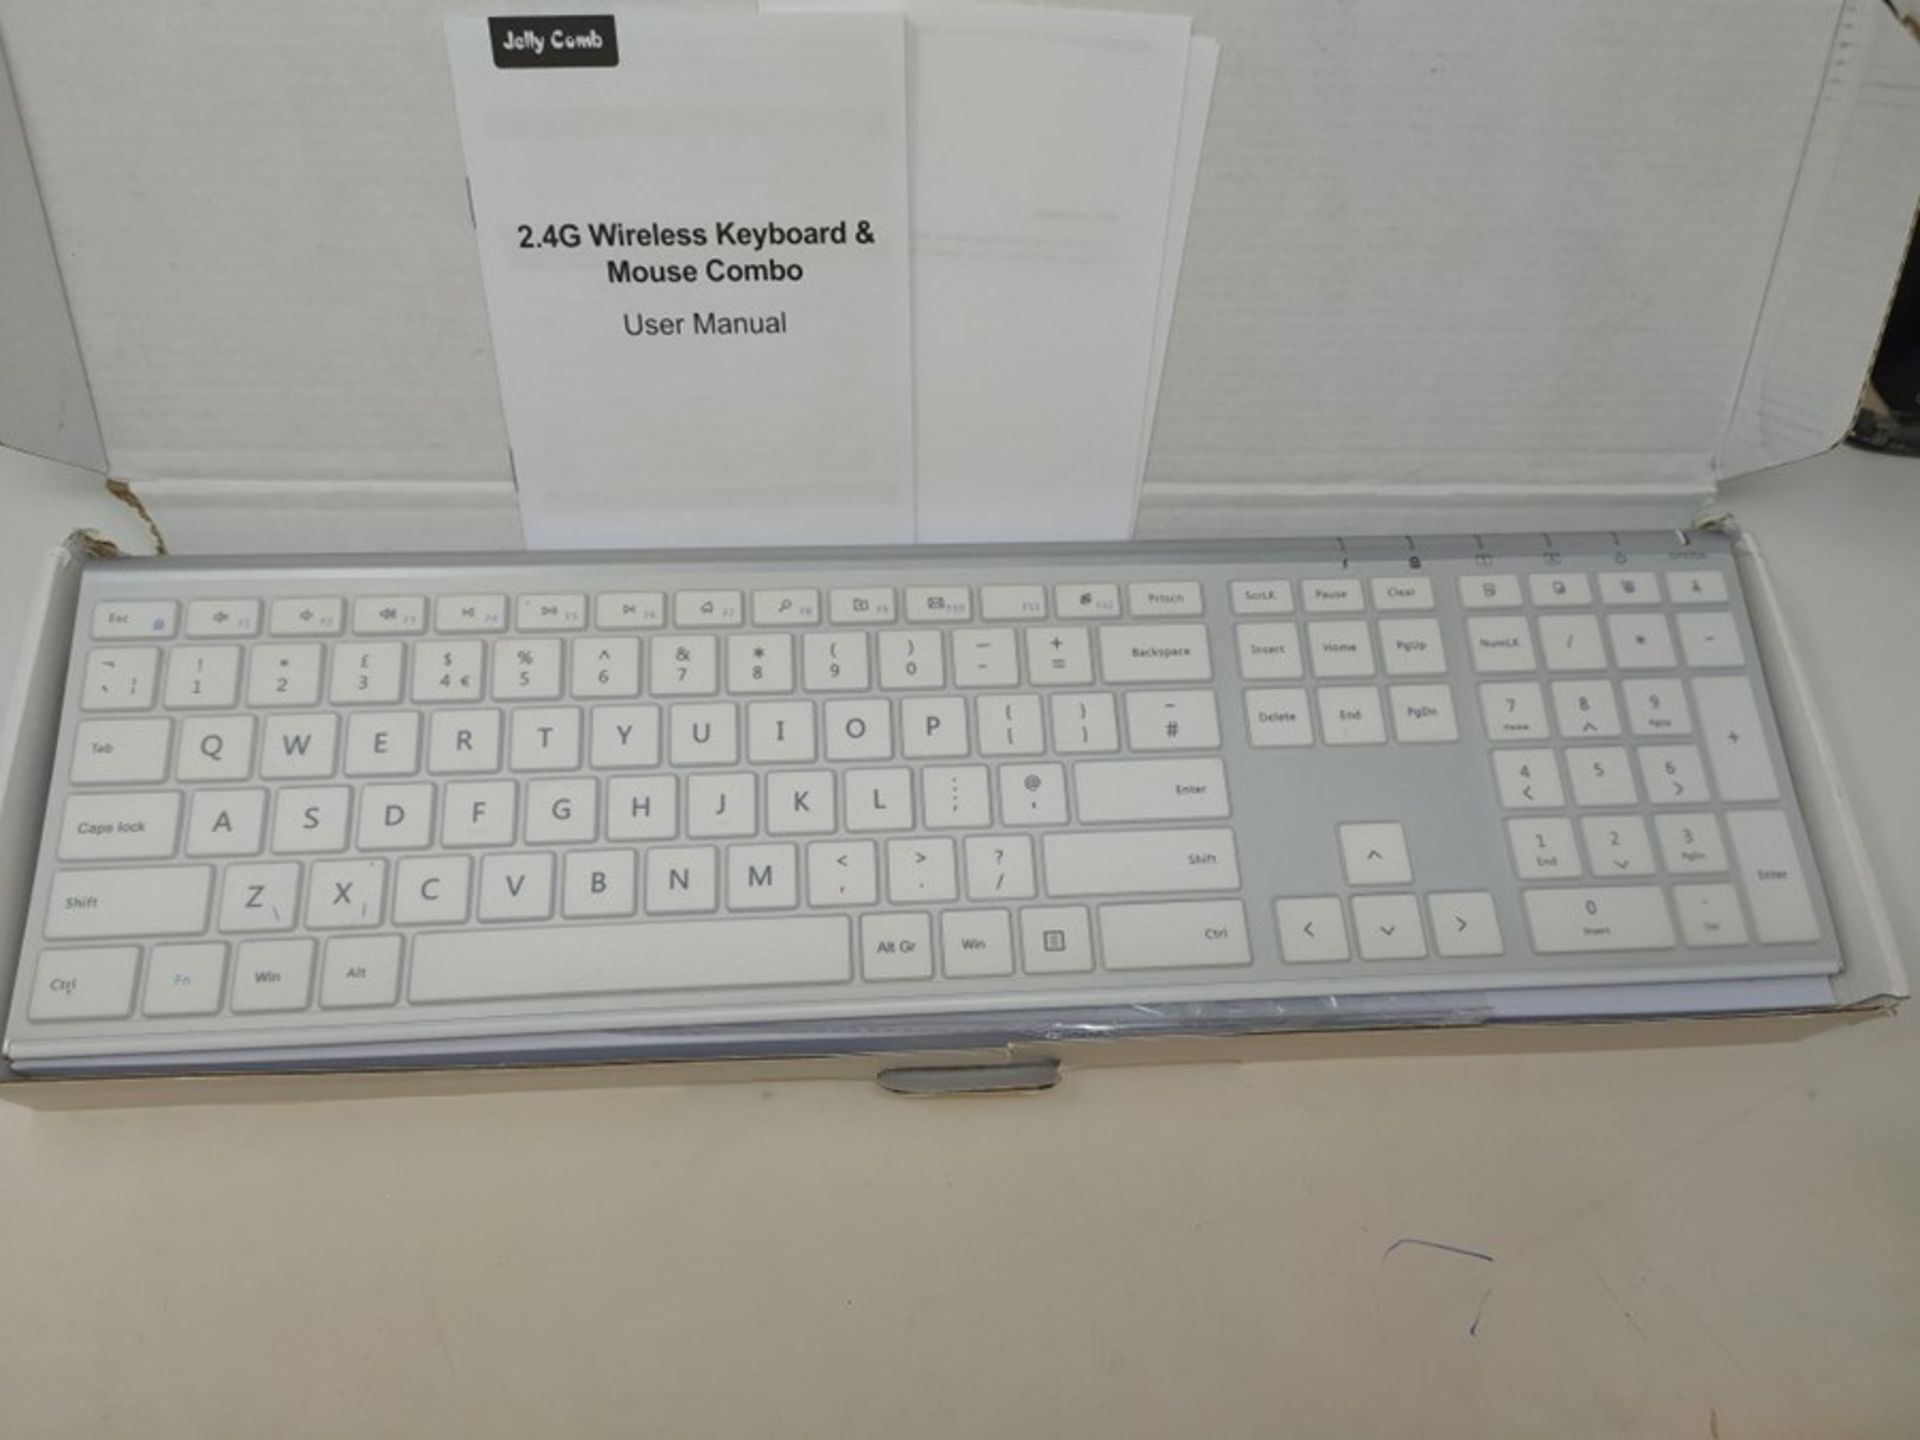 Wireless Keyboard and Mouse Combo, Jelly Comb 2.4G Full Size USB Rechargeable Keyboard - Image 2 of 2